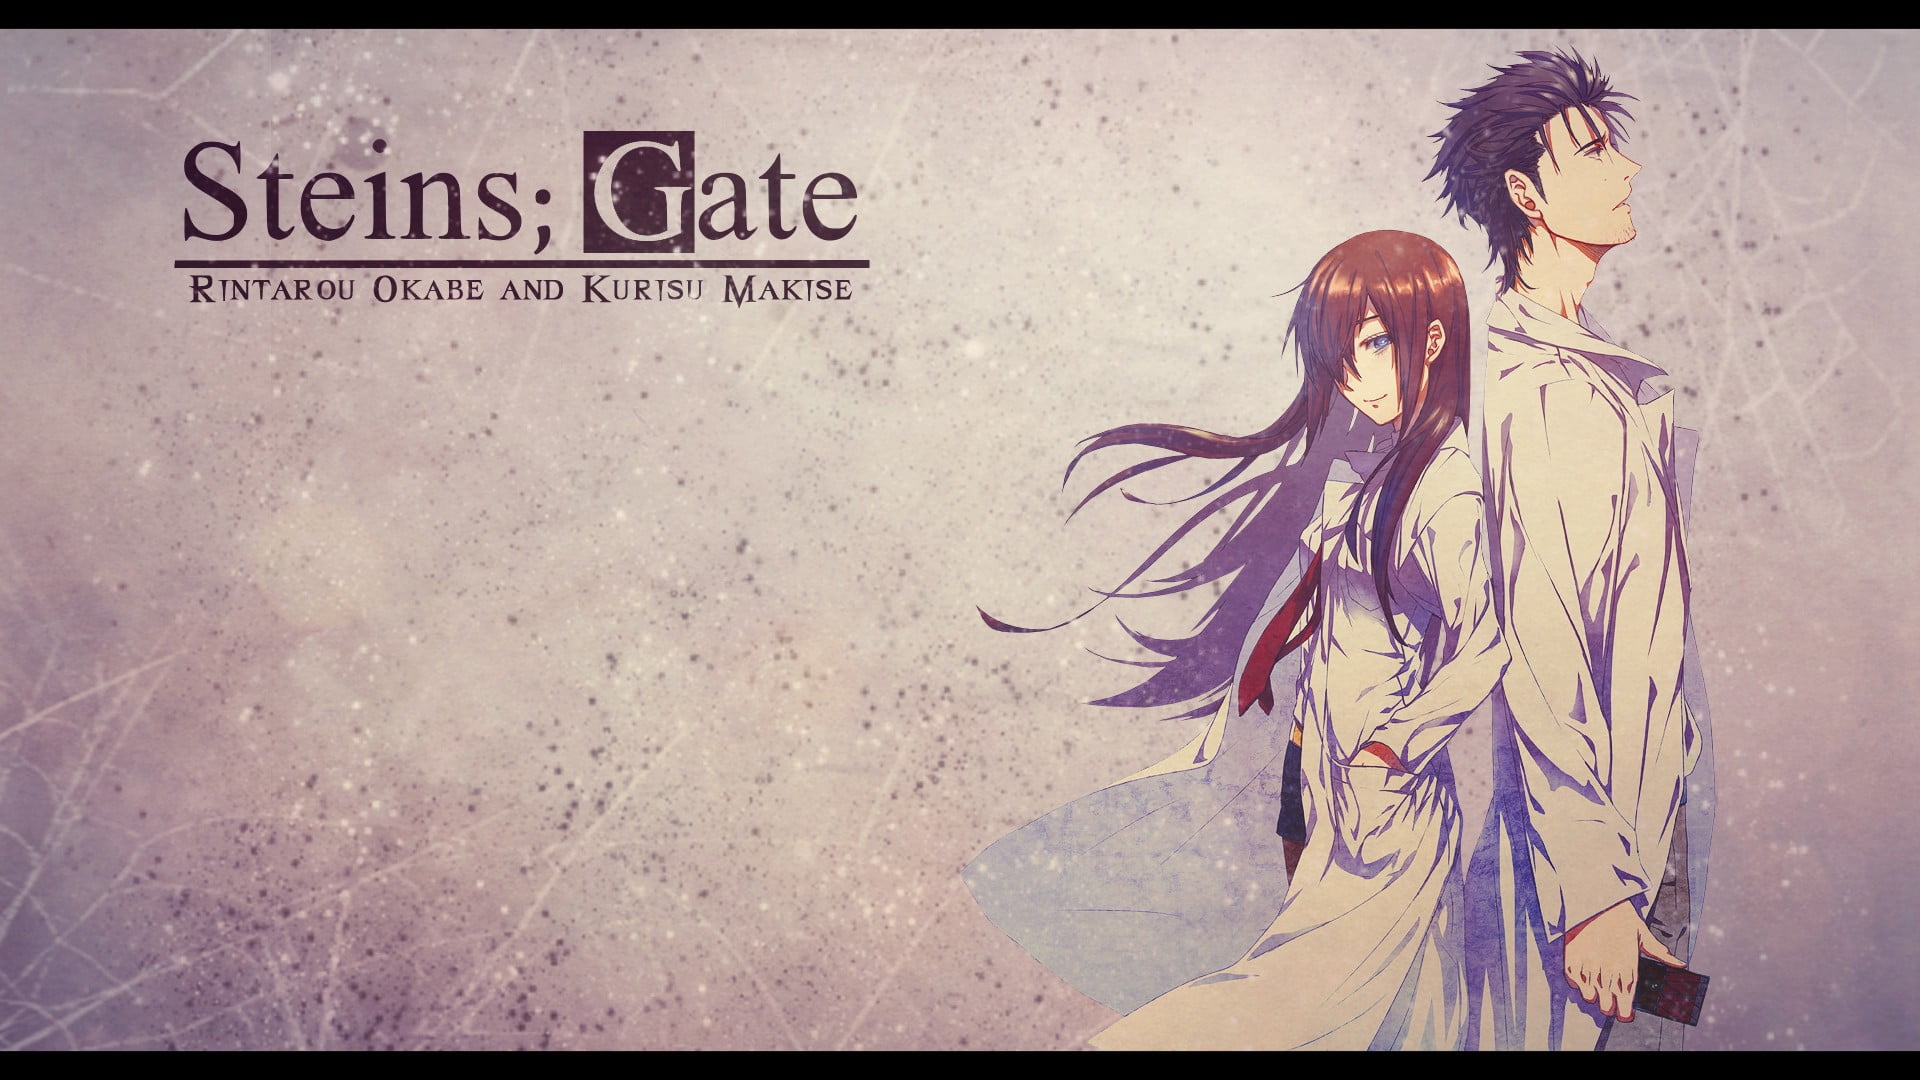 Steins Gate wallpaper illustration, Steins;Gate, one person, young adult